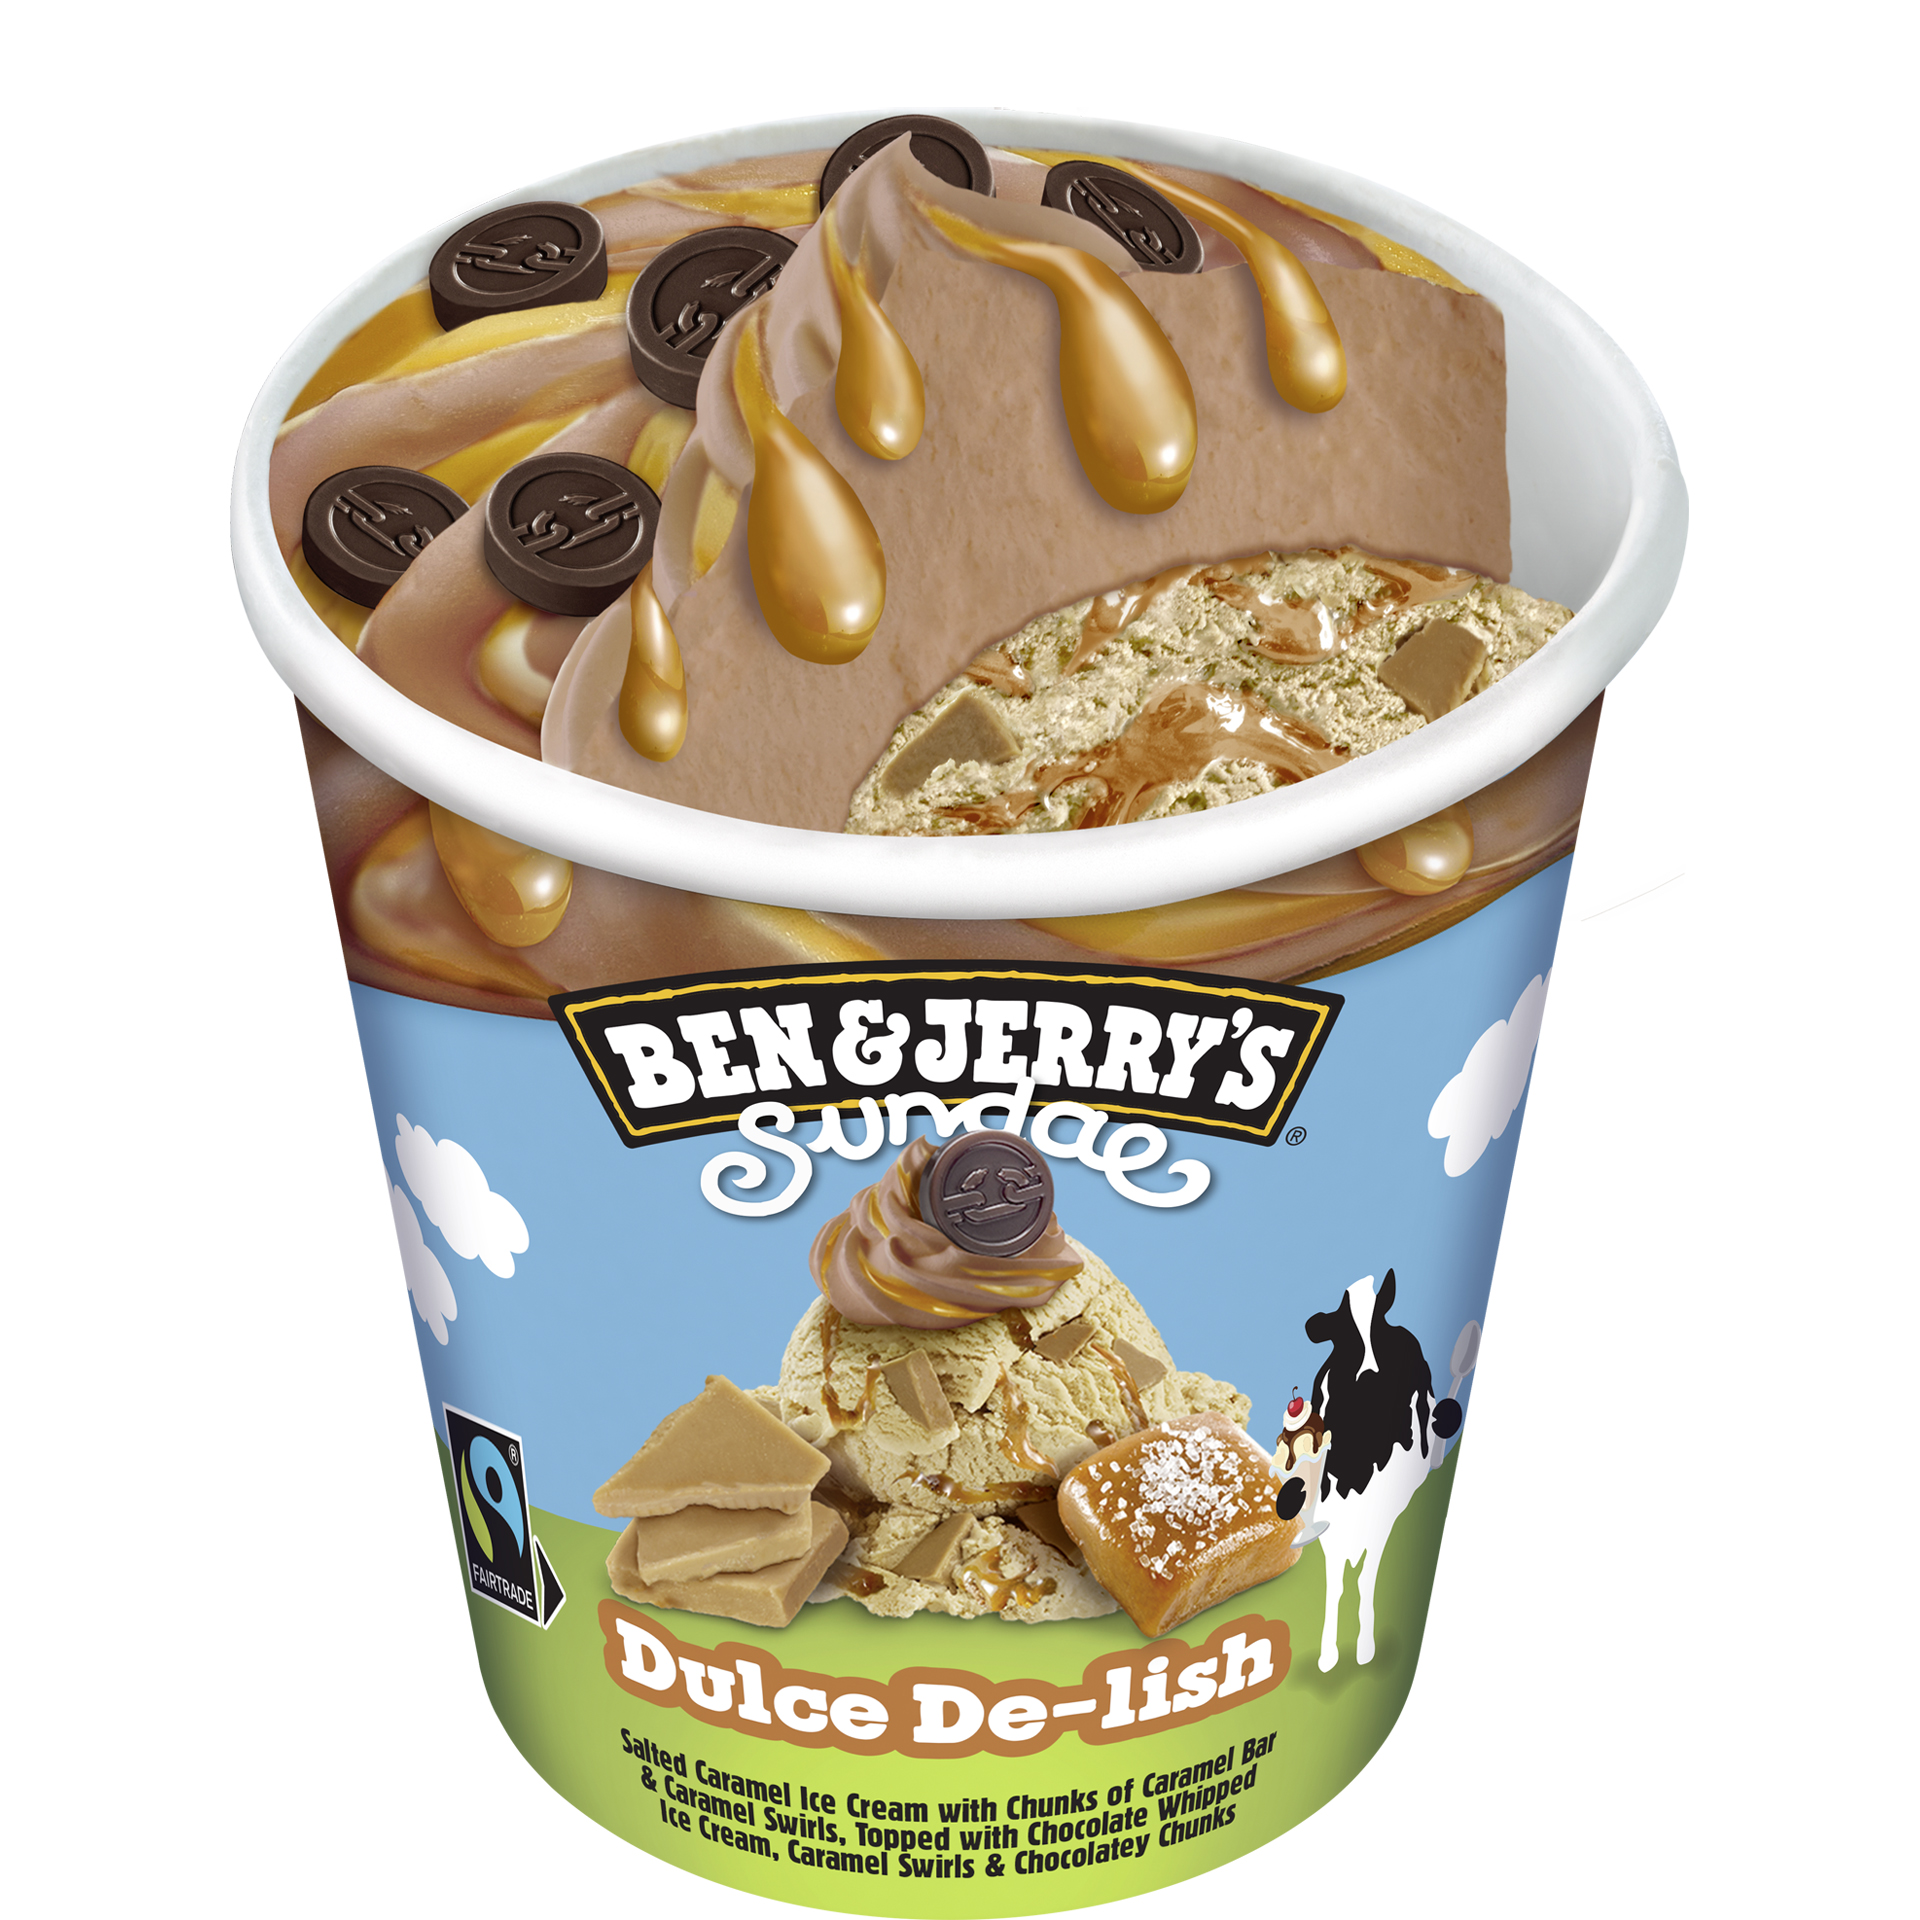 Asda are selling a pot of Ben & Jerry’s for just £3.75